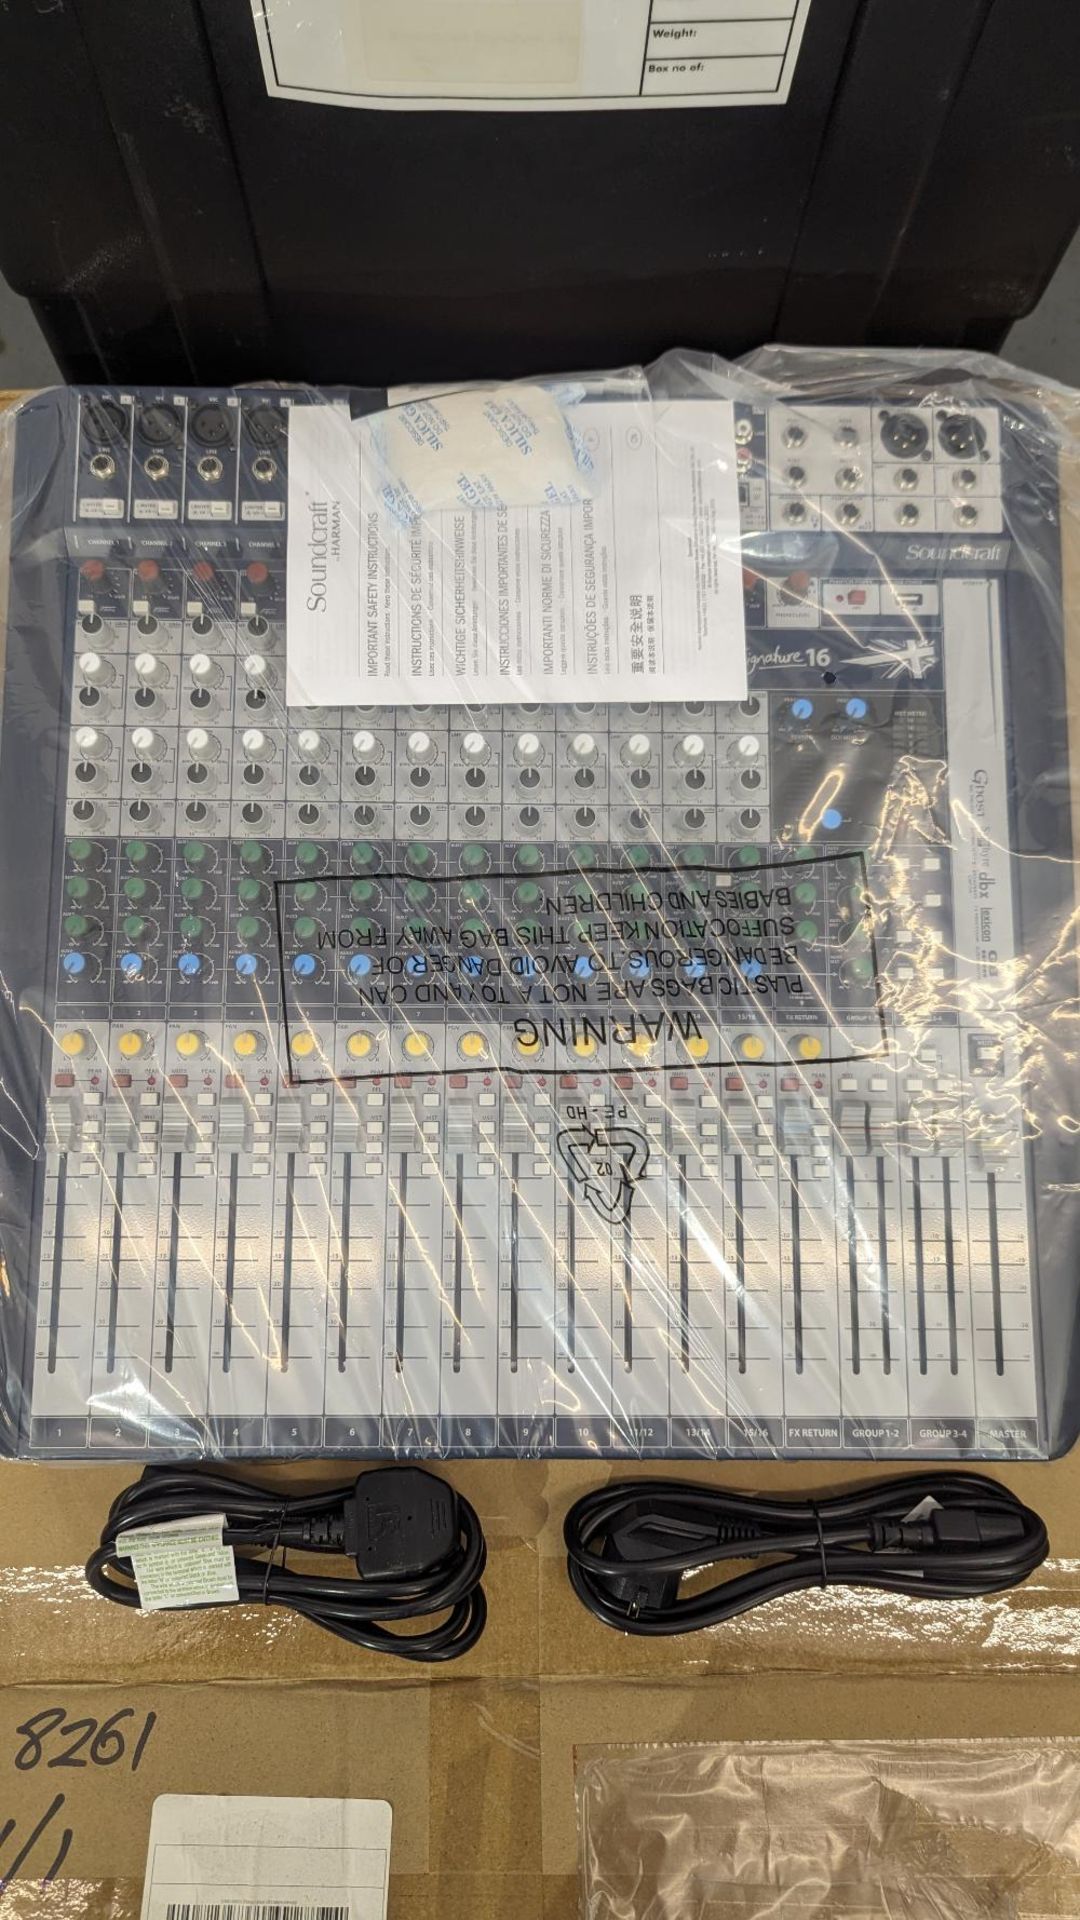 Soundcraft Signature 16 Analogue Mixing Desk Console (Brand new with original box and packaging) - Image 2 of 4